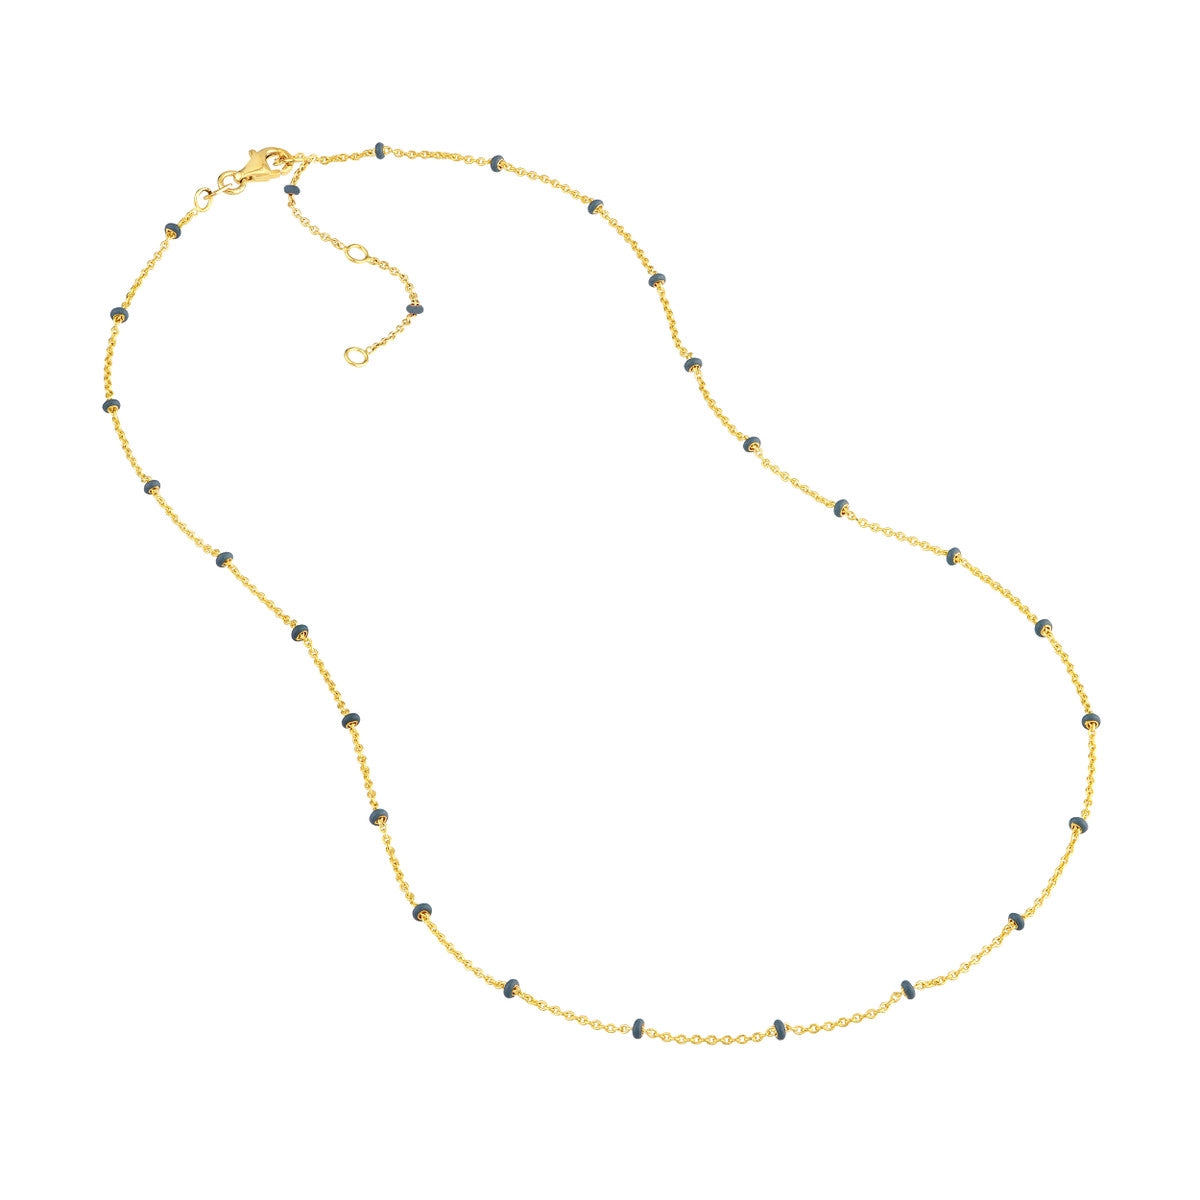 14K GOLD ROLO CHAIN WITH GREY ENAMEL BEADS